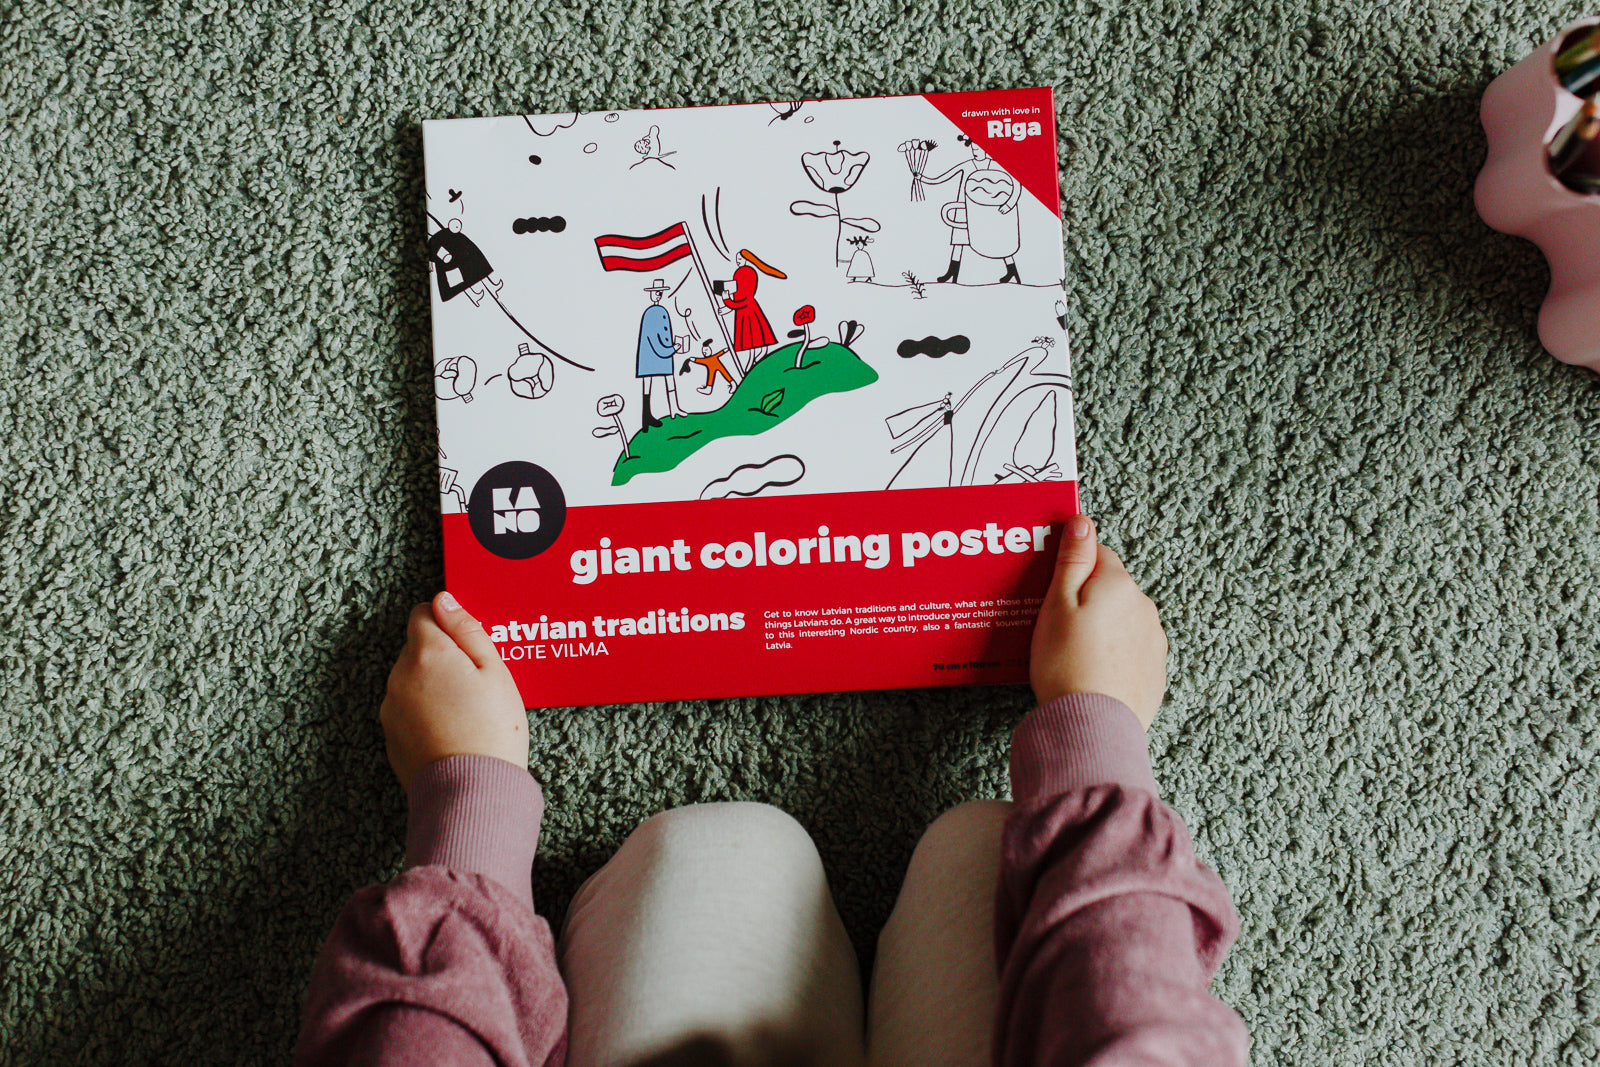 XXL giant coloring poster Latvian traditions, isbn 978-9934-8993-1-7,  box of the poster in the hand of a child